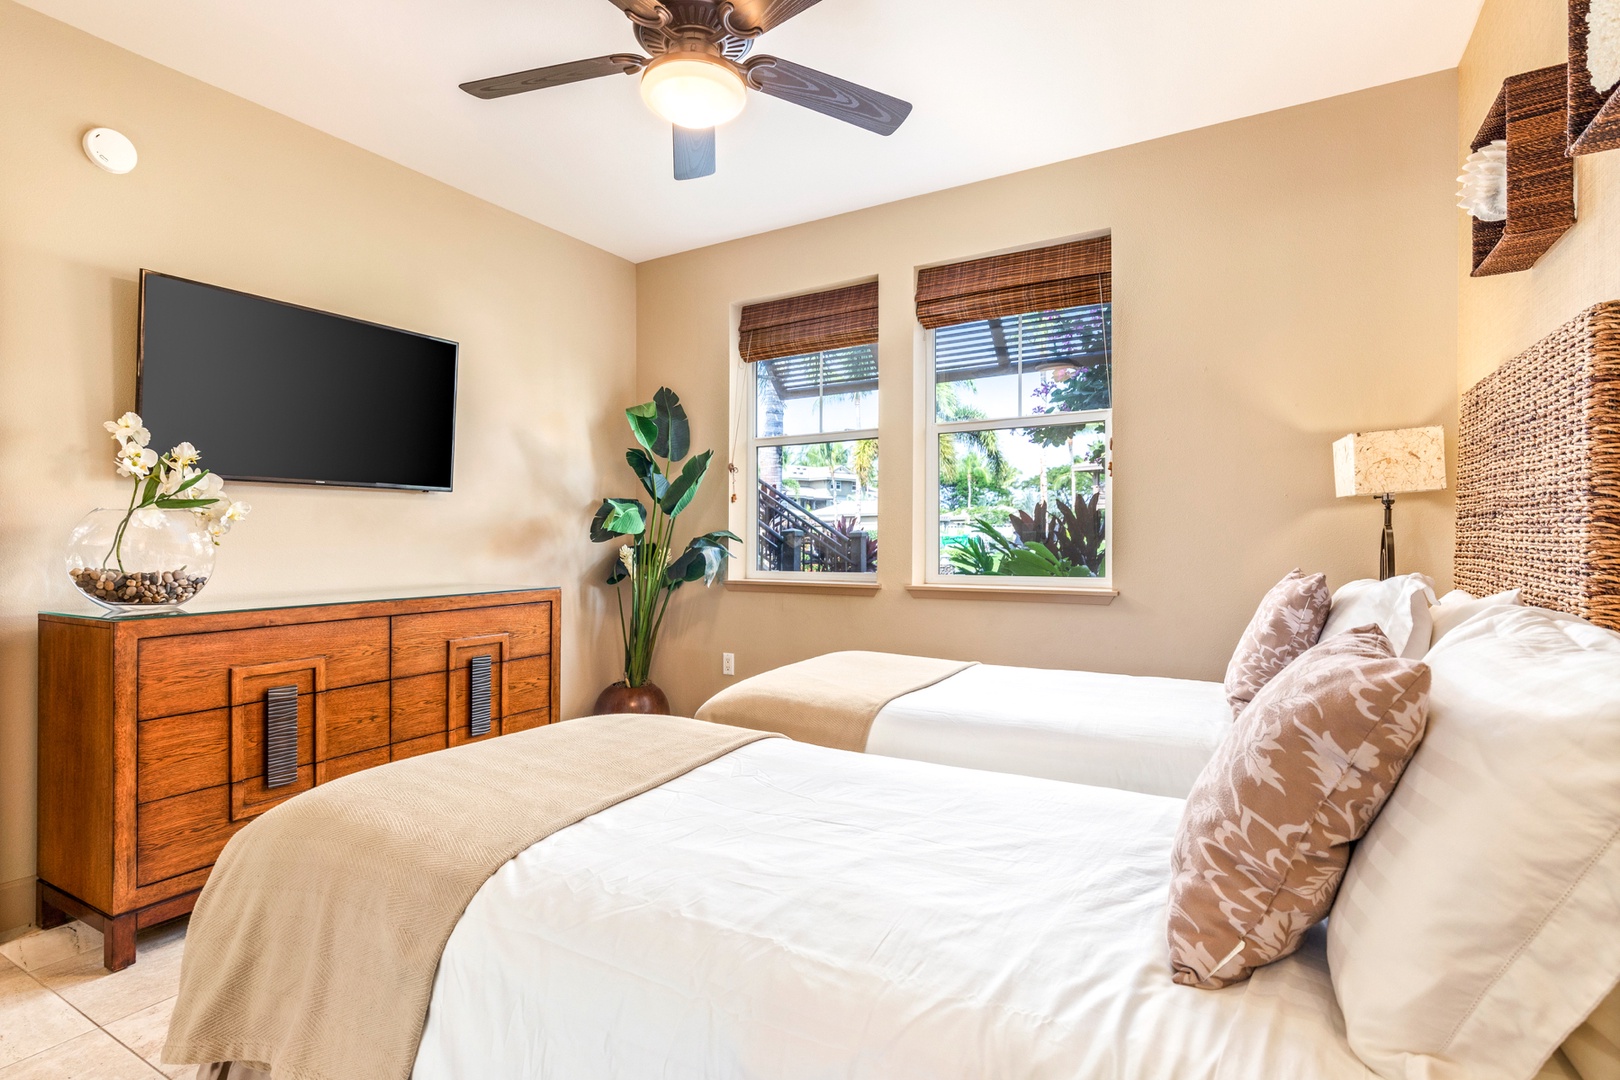 Waikoloa Vacation Rentals, 2BD Hali'i Kai (12C) at Waikoloa Resort - Guest bedroom with two twin beds (can convert to a king upon request), wall mounted smart flat screen TV and an adjacent full bath.